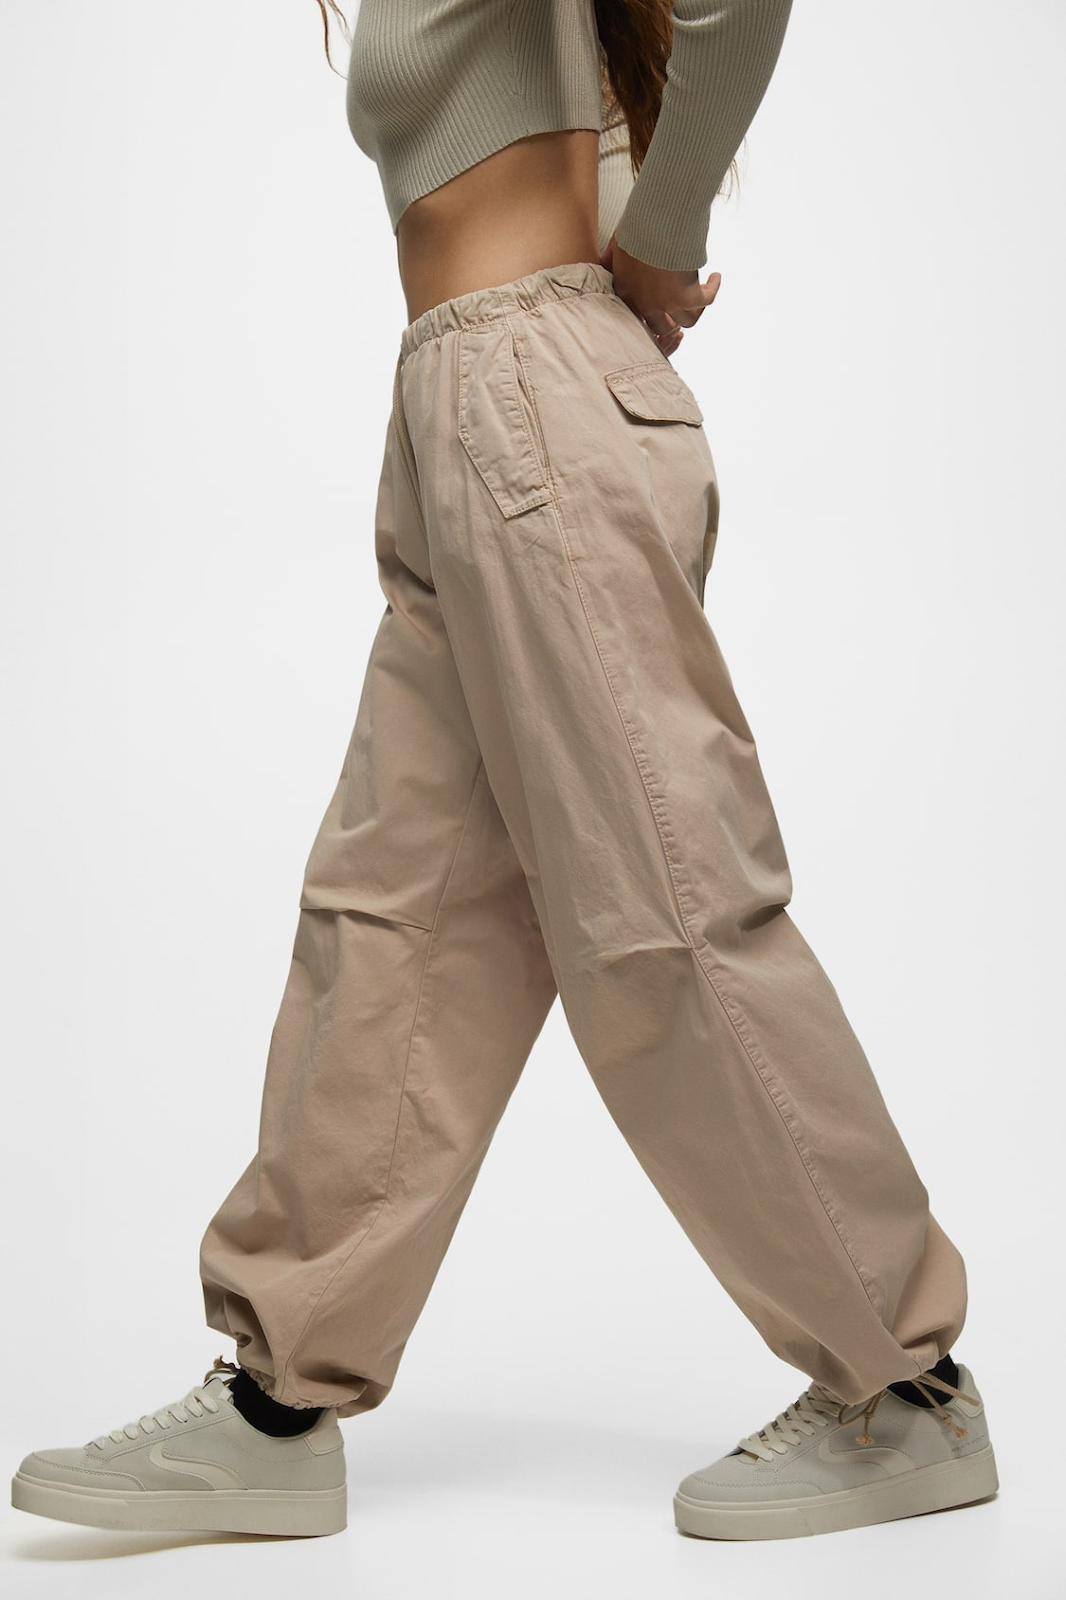 How to Wear Parachute Pants for a Chic Look